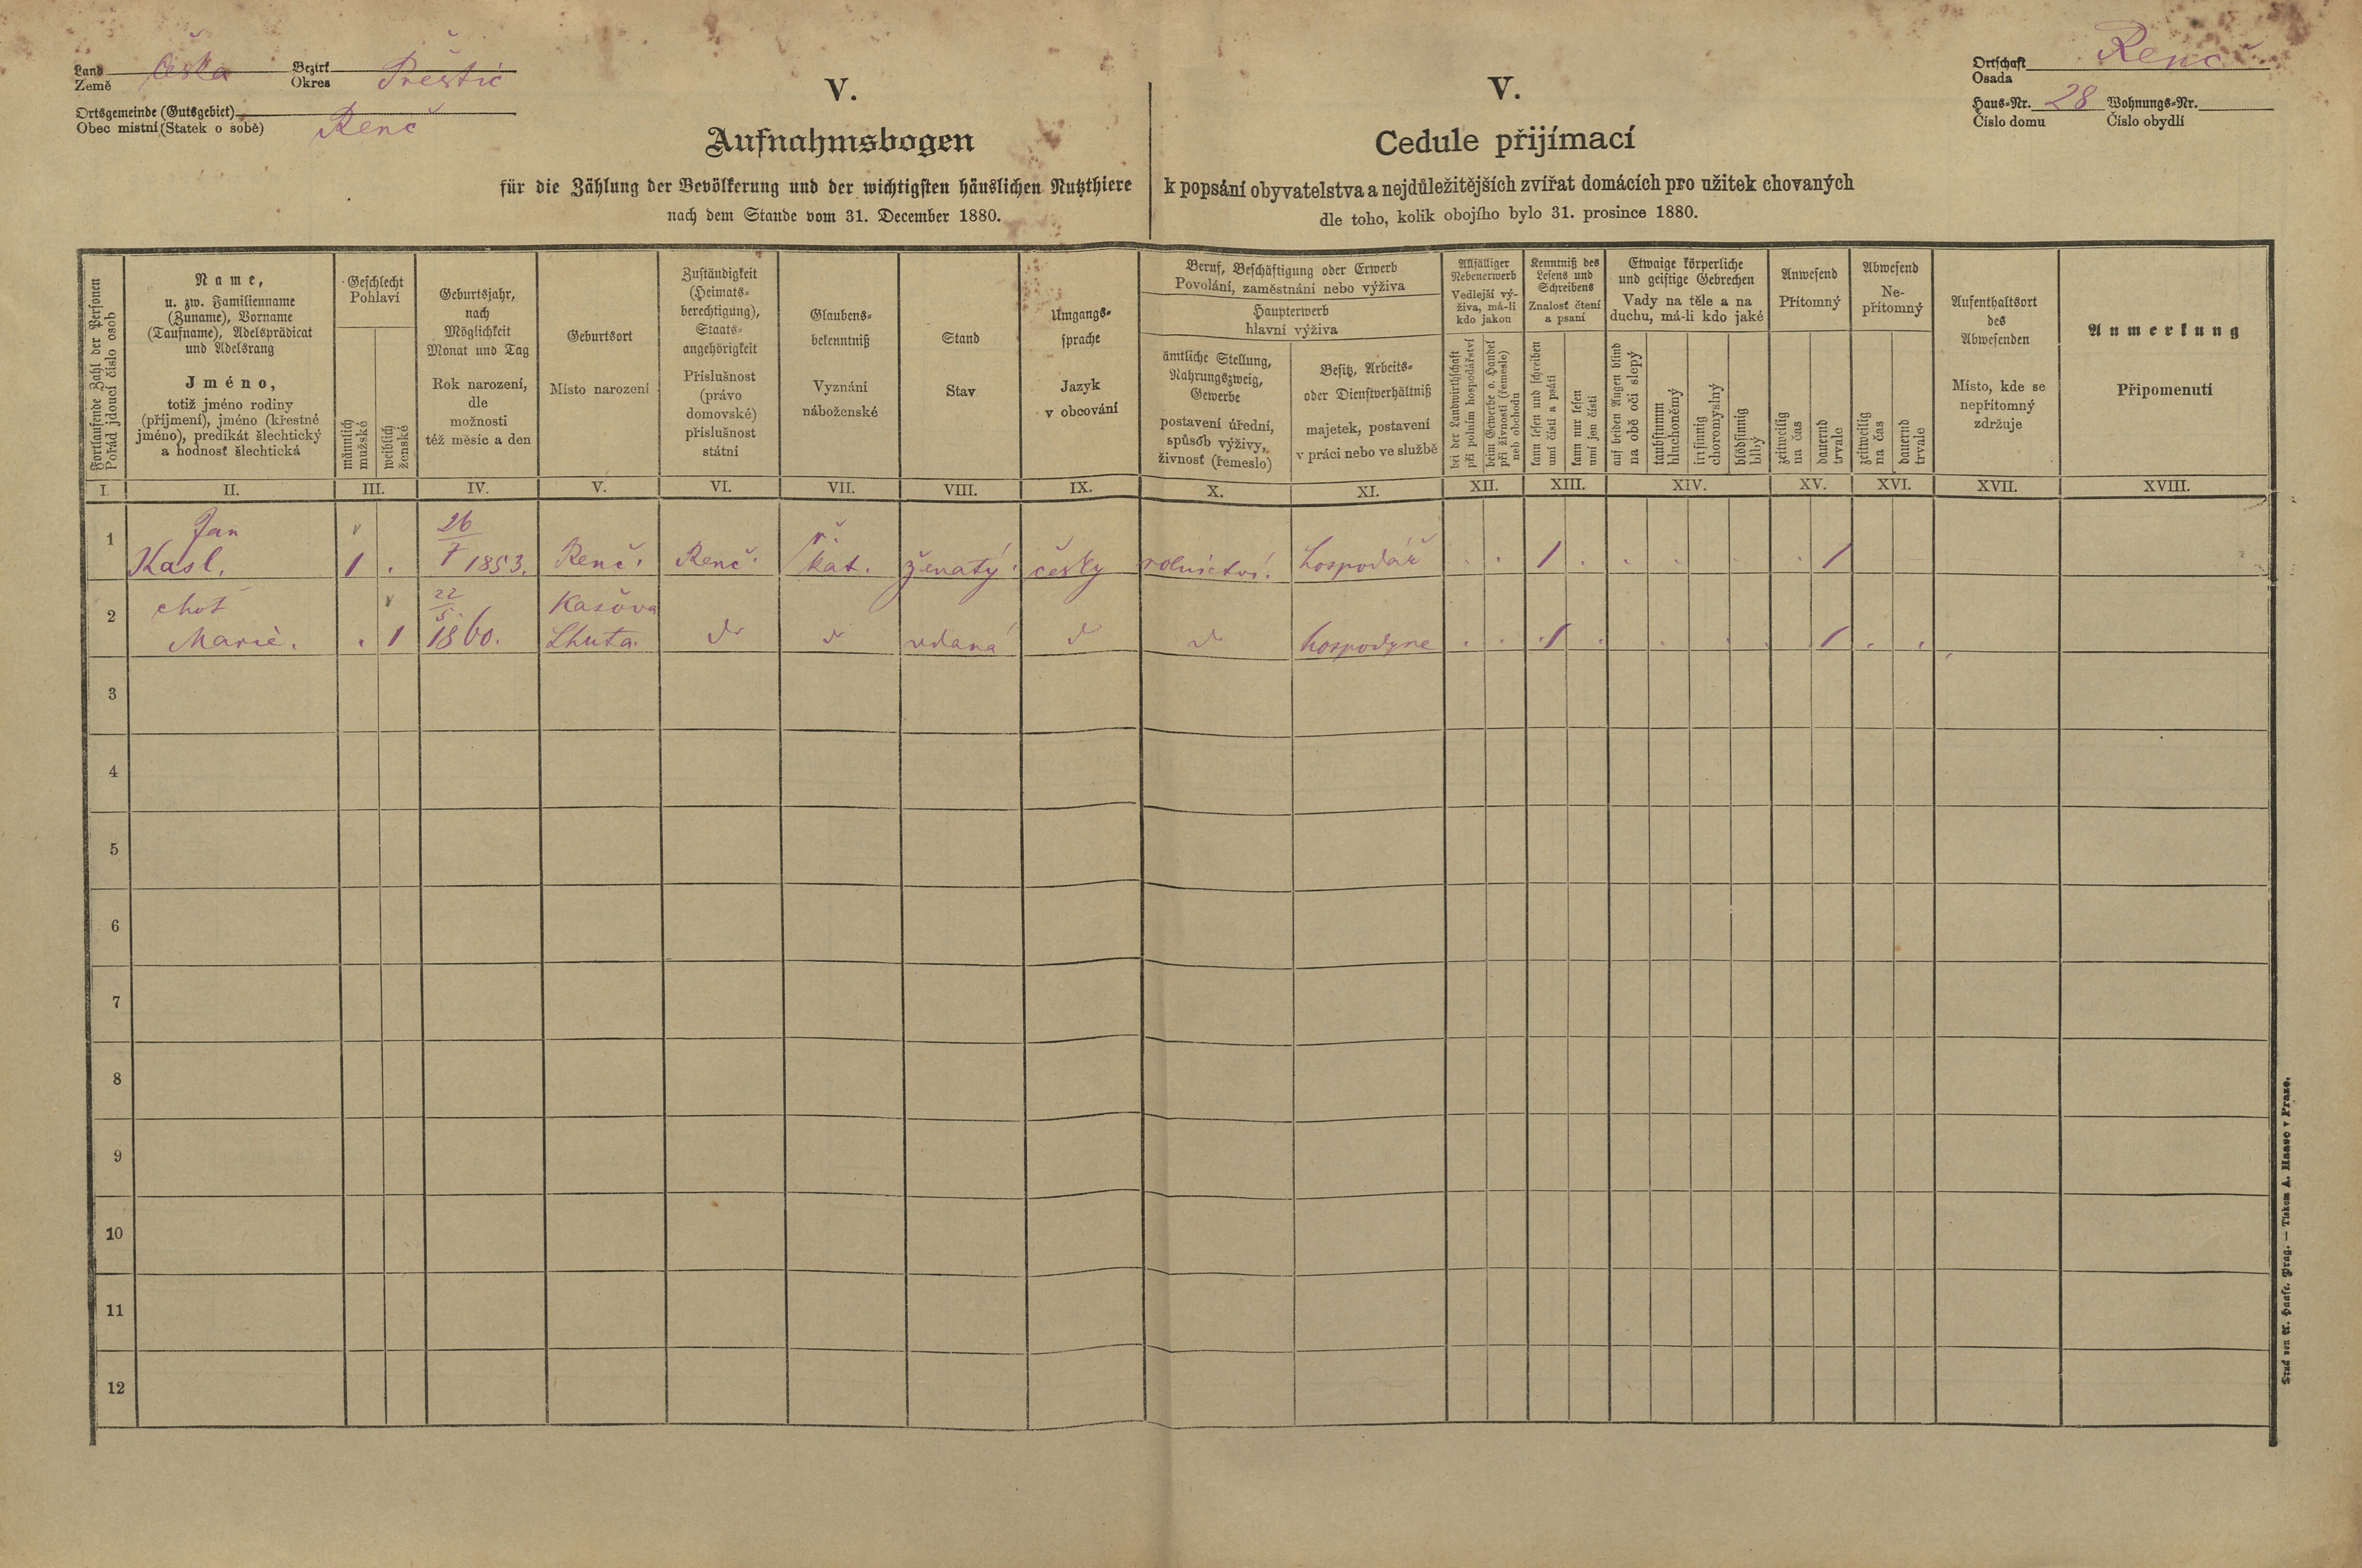 1. soap-pj_00302_census-1880-rence-cp028_0010